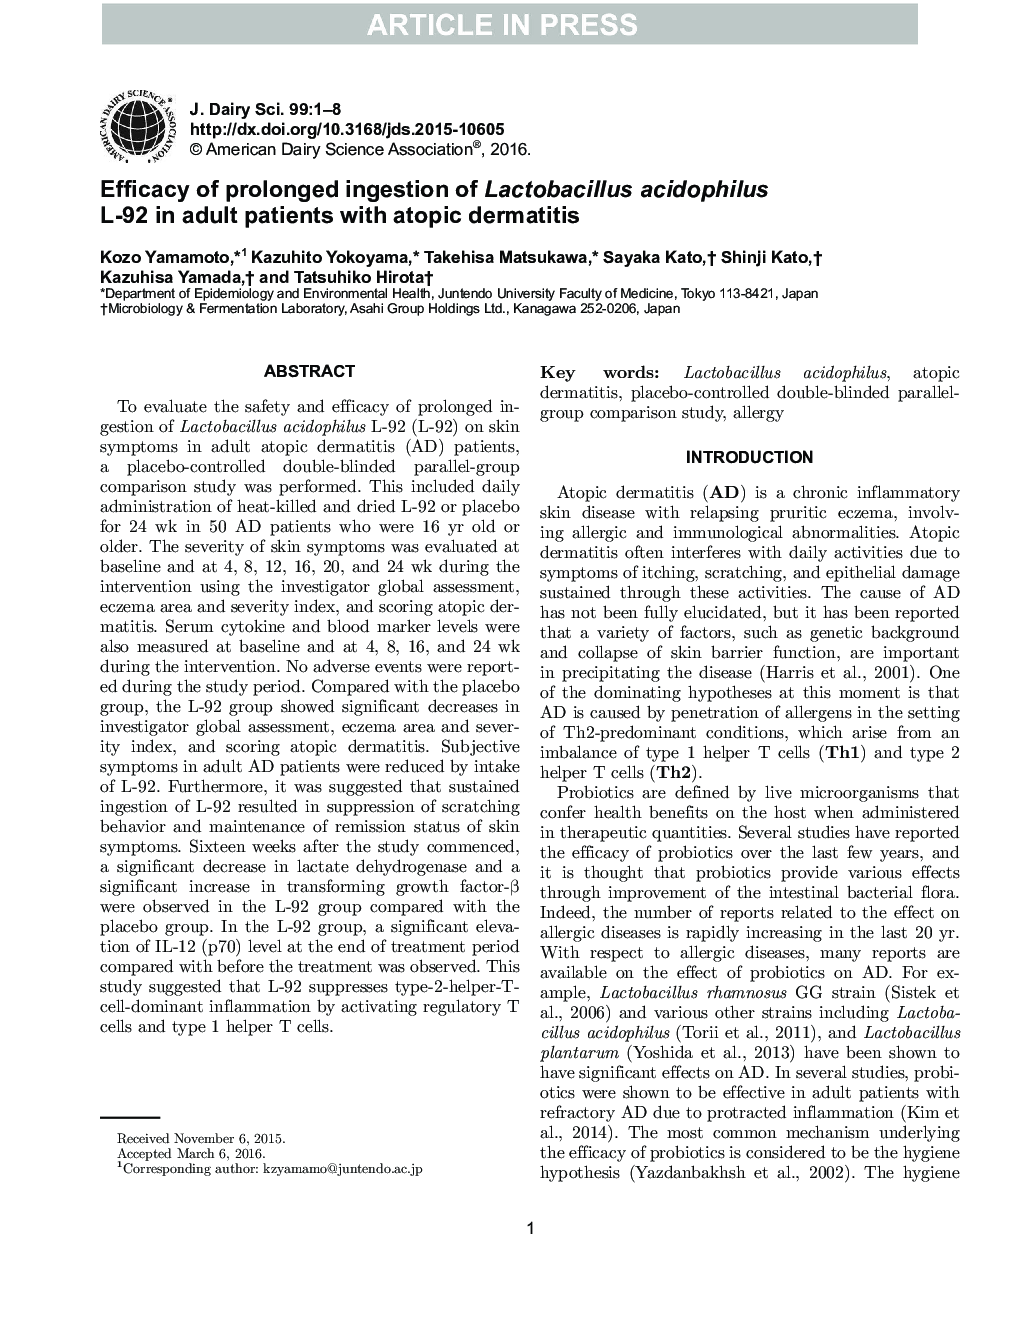 Efficacy of prolonged ingestion of Lactobacillus acidophilus L-92 in adult patients with atopic dermatitis